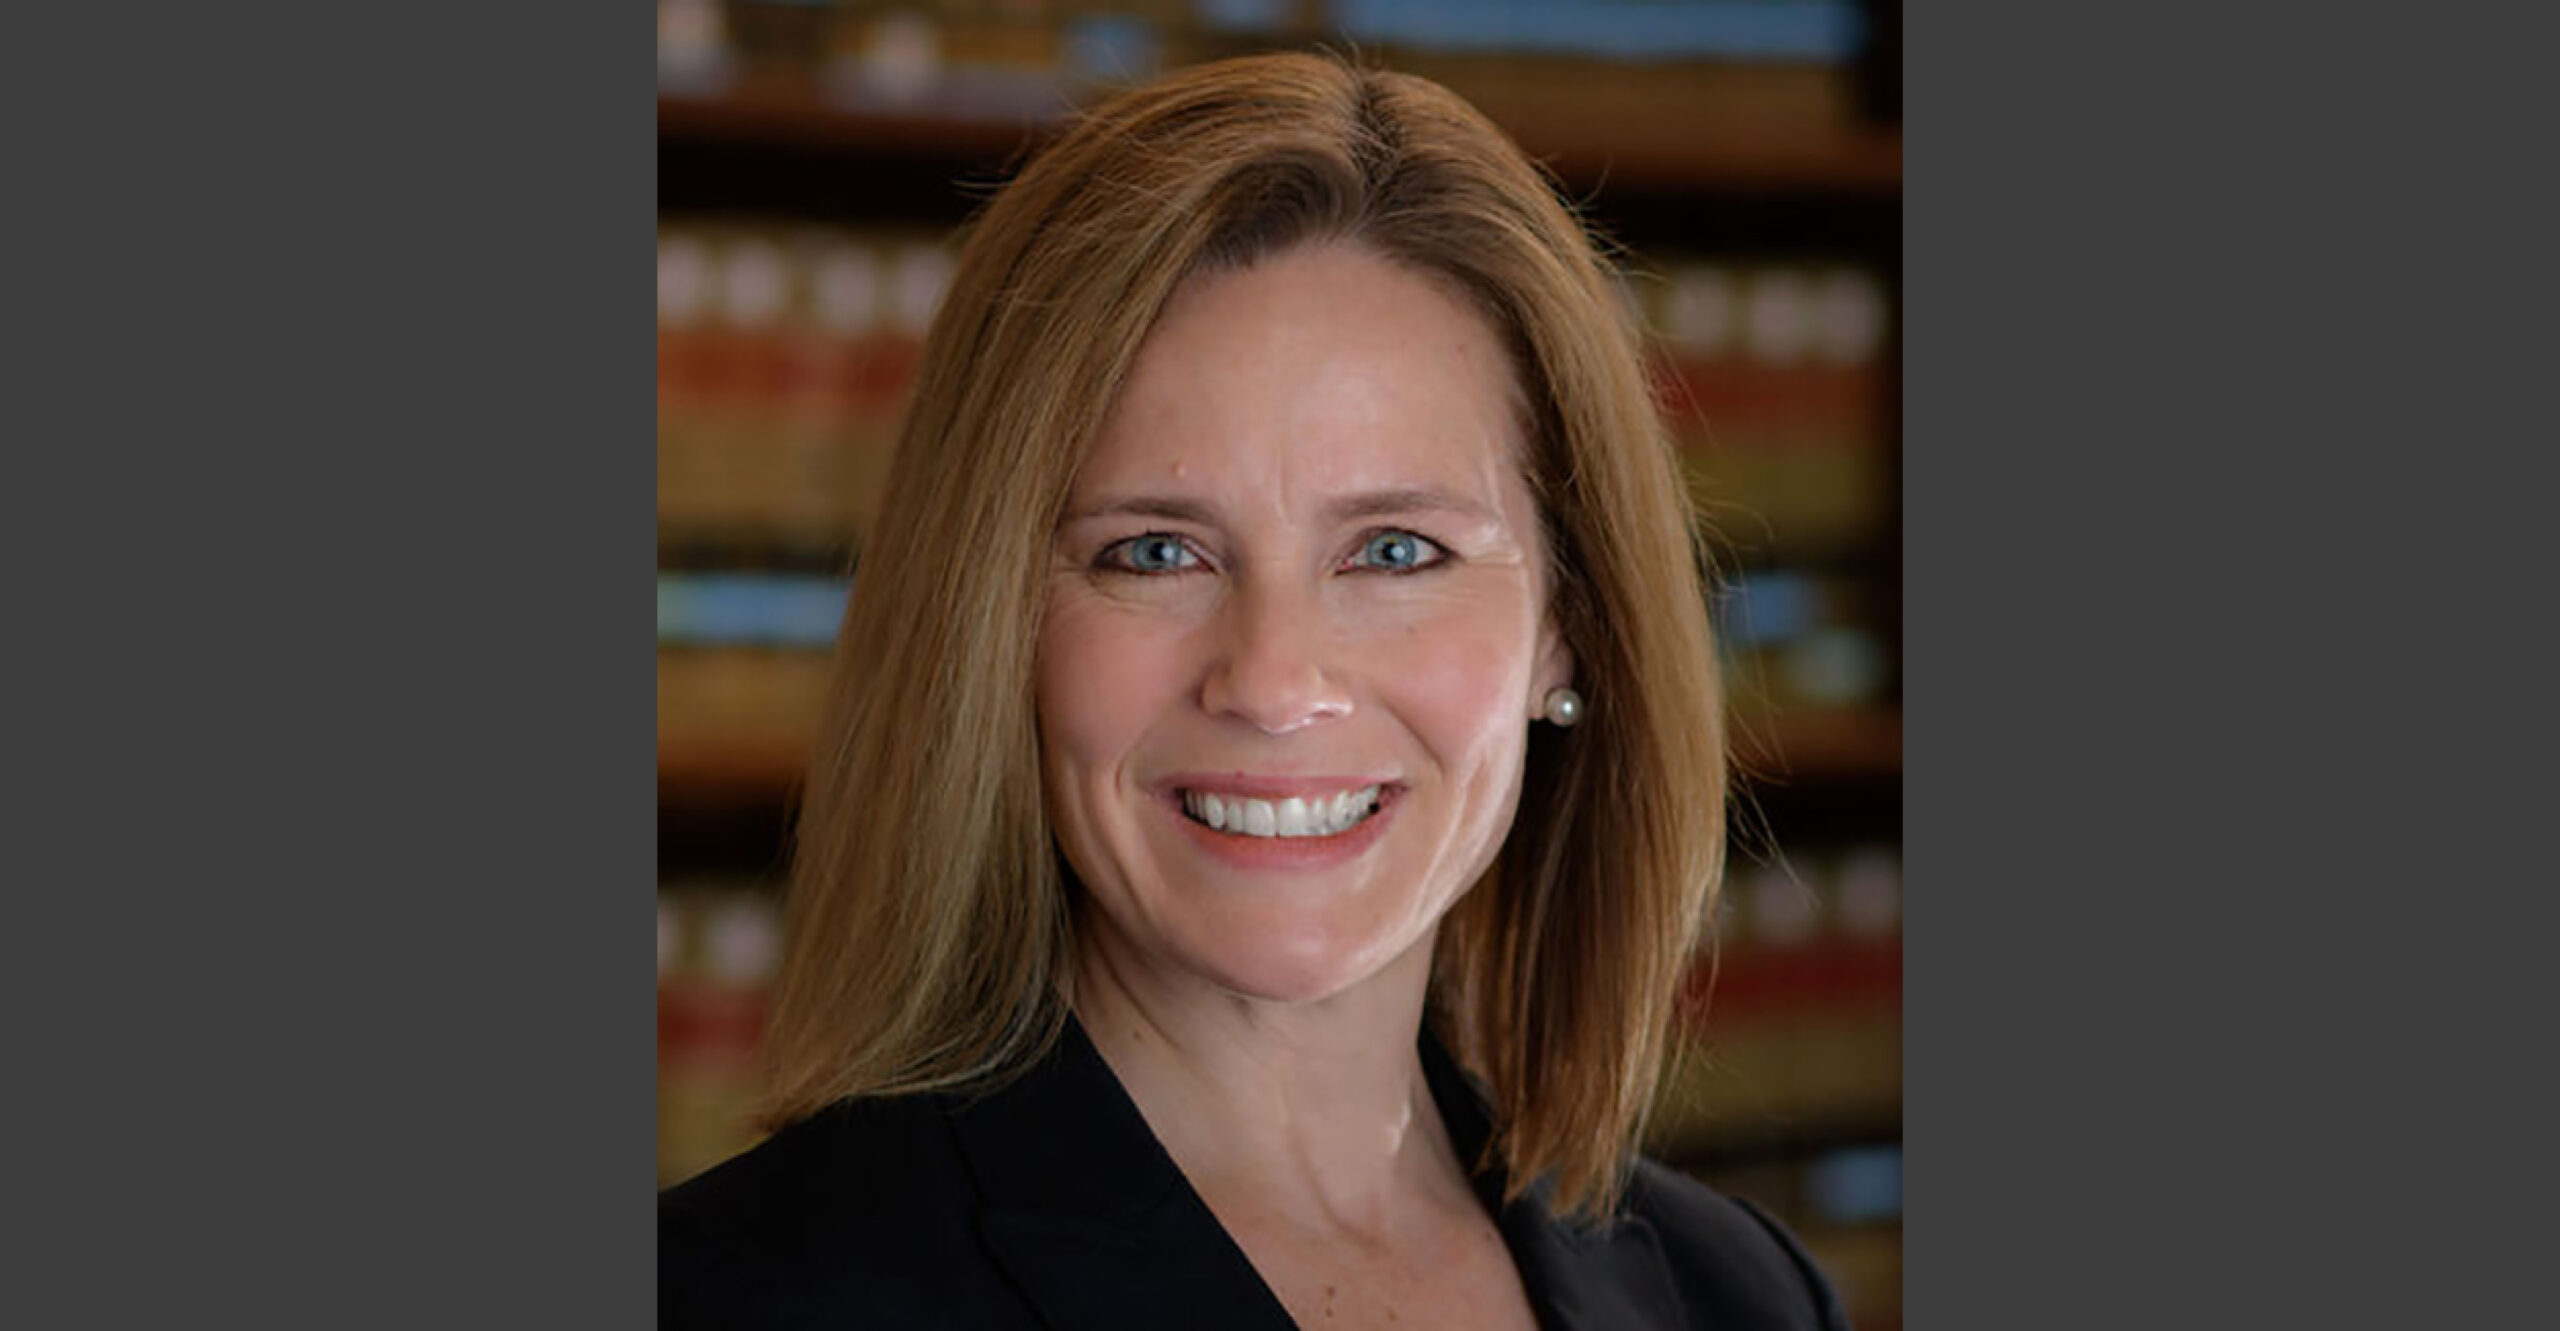 He's a Friend of Supreme Court Prospect Amy Coney Barrett. Here's What He Has to Say.